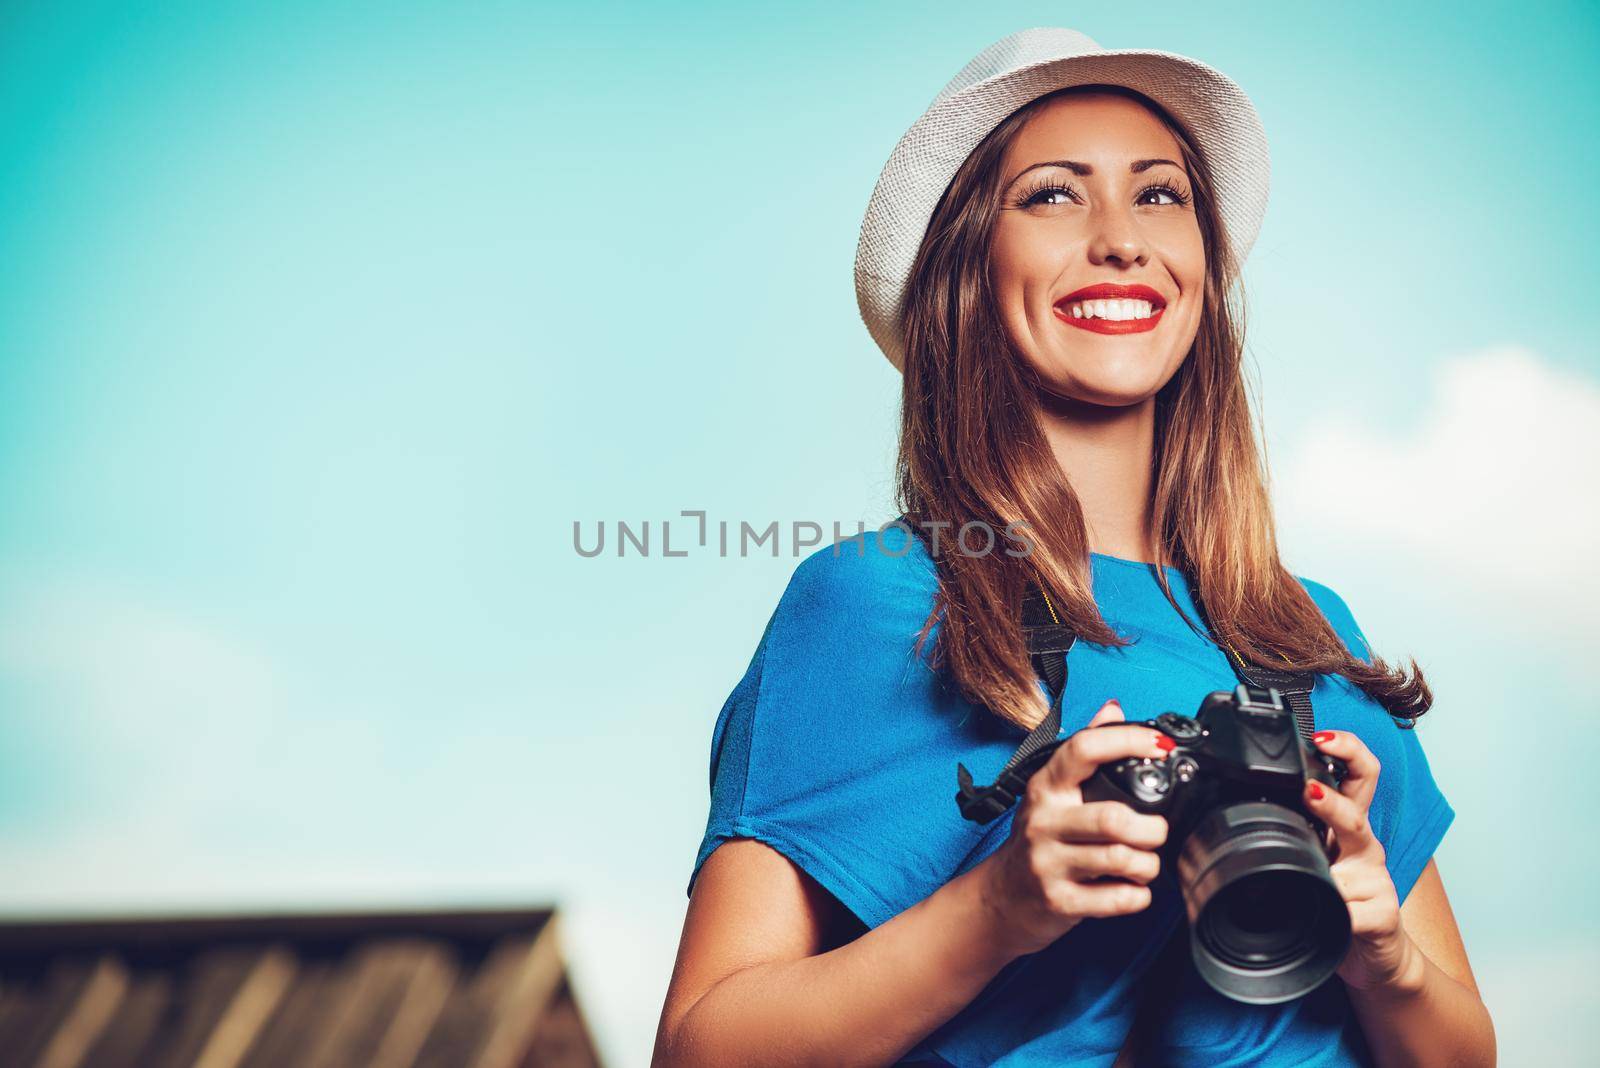 Young beautiful woman standing by viewpoint and holding digital camera.